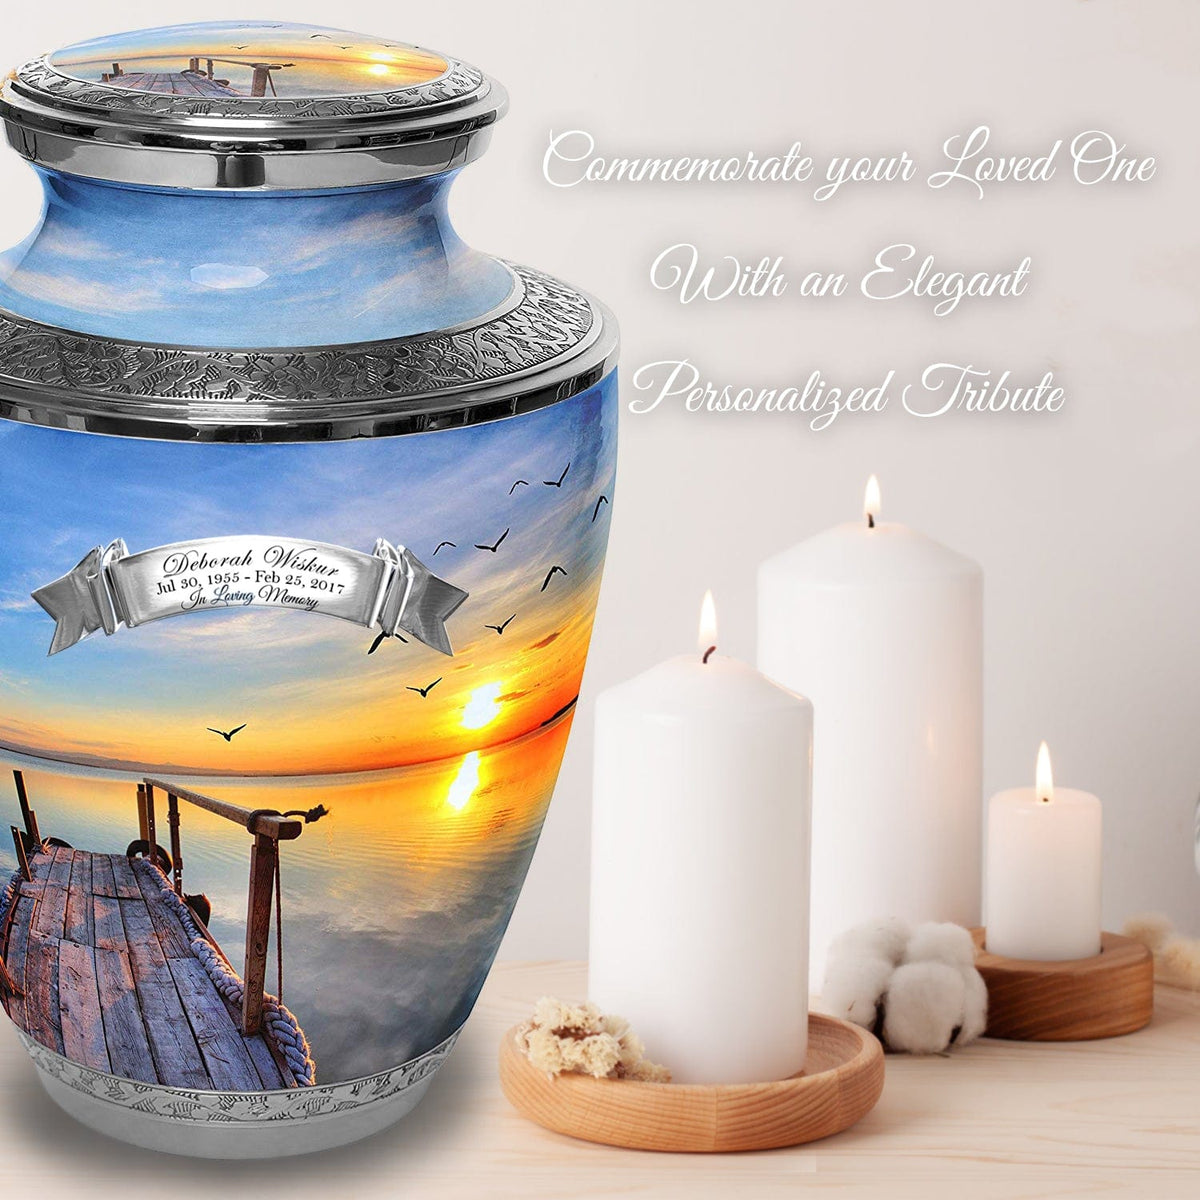 Commemorative Cremation Urns Dock of the Bay Cremation Urns